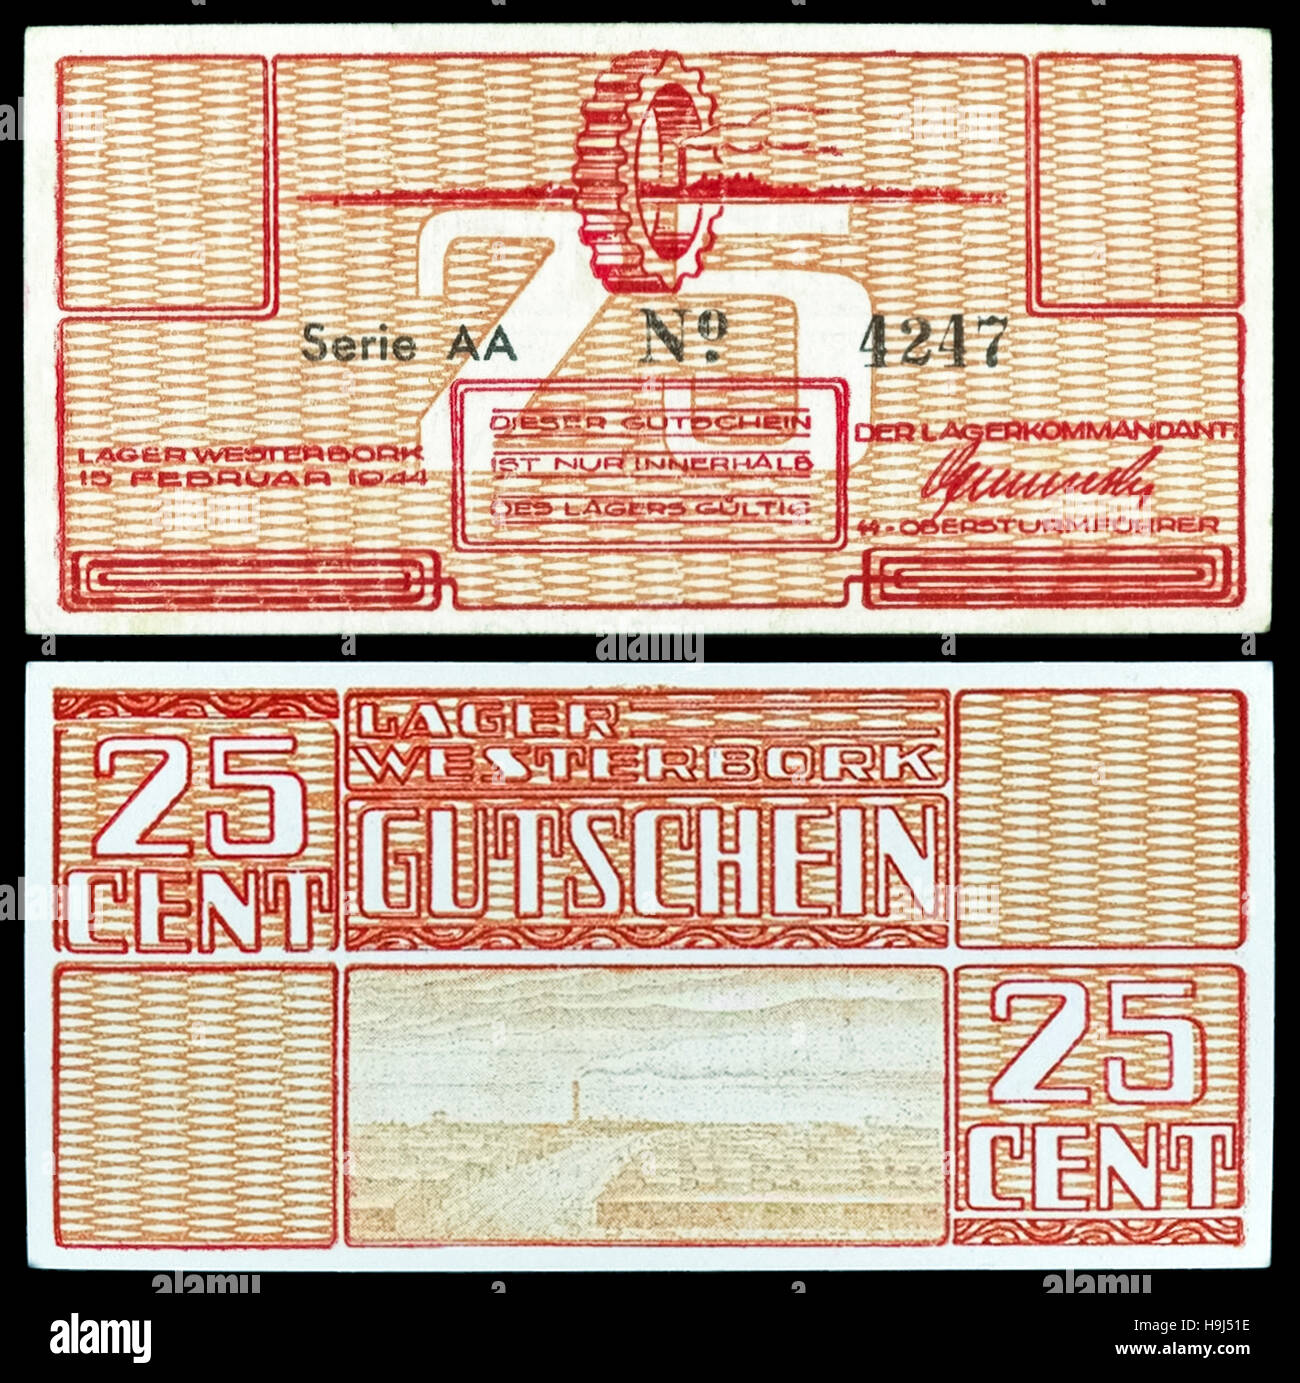 25 Cent Concentration camp currency issued by Westerbork transit camp in the Netherlands where over 100,000 Dutch Jews, including Anne Frank, were kept prior to transportation to concentration camps for execution; less than 5,000 survived. The Nazi’s issued the money to labourers who could exchange them for items and food within the camp. See description for more information Stock Photo